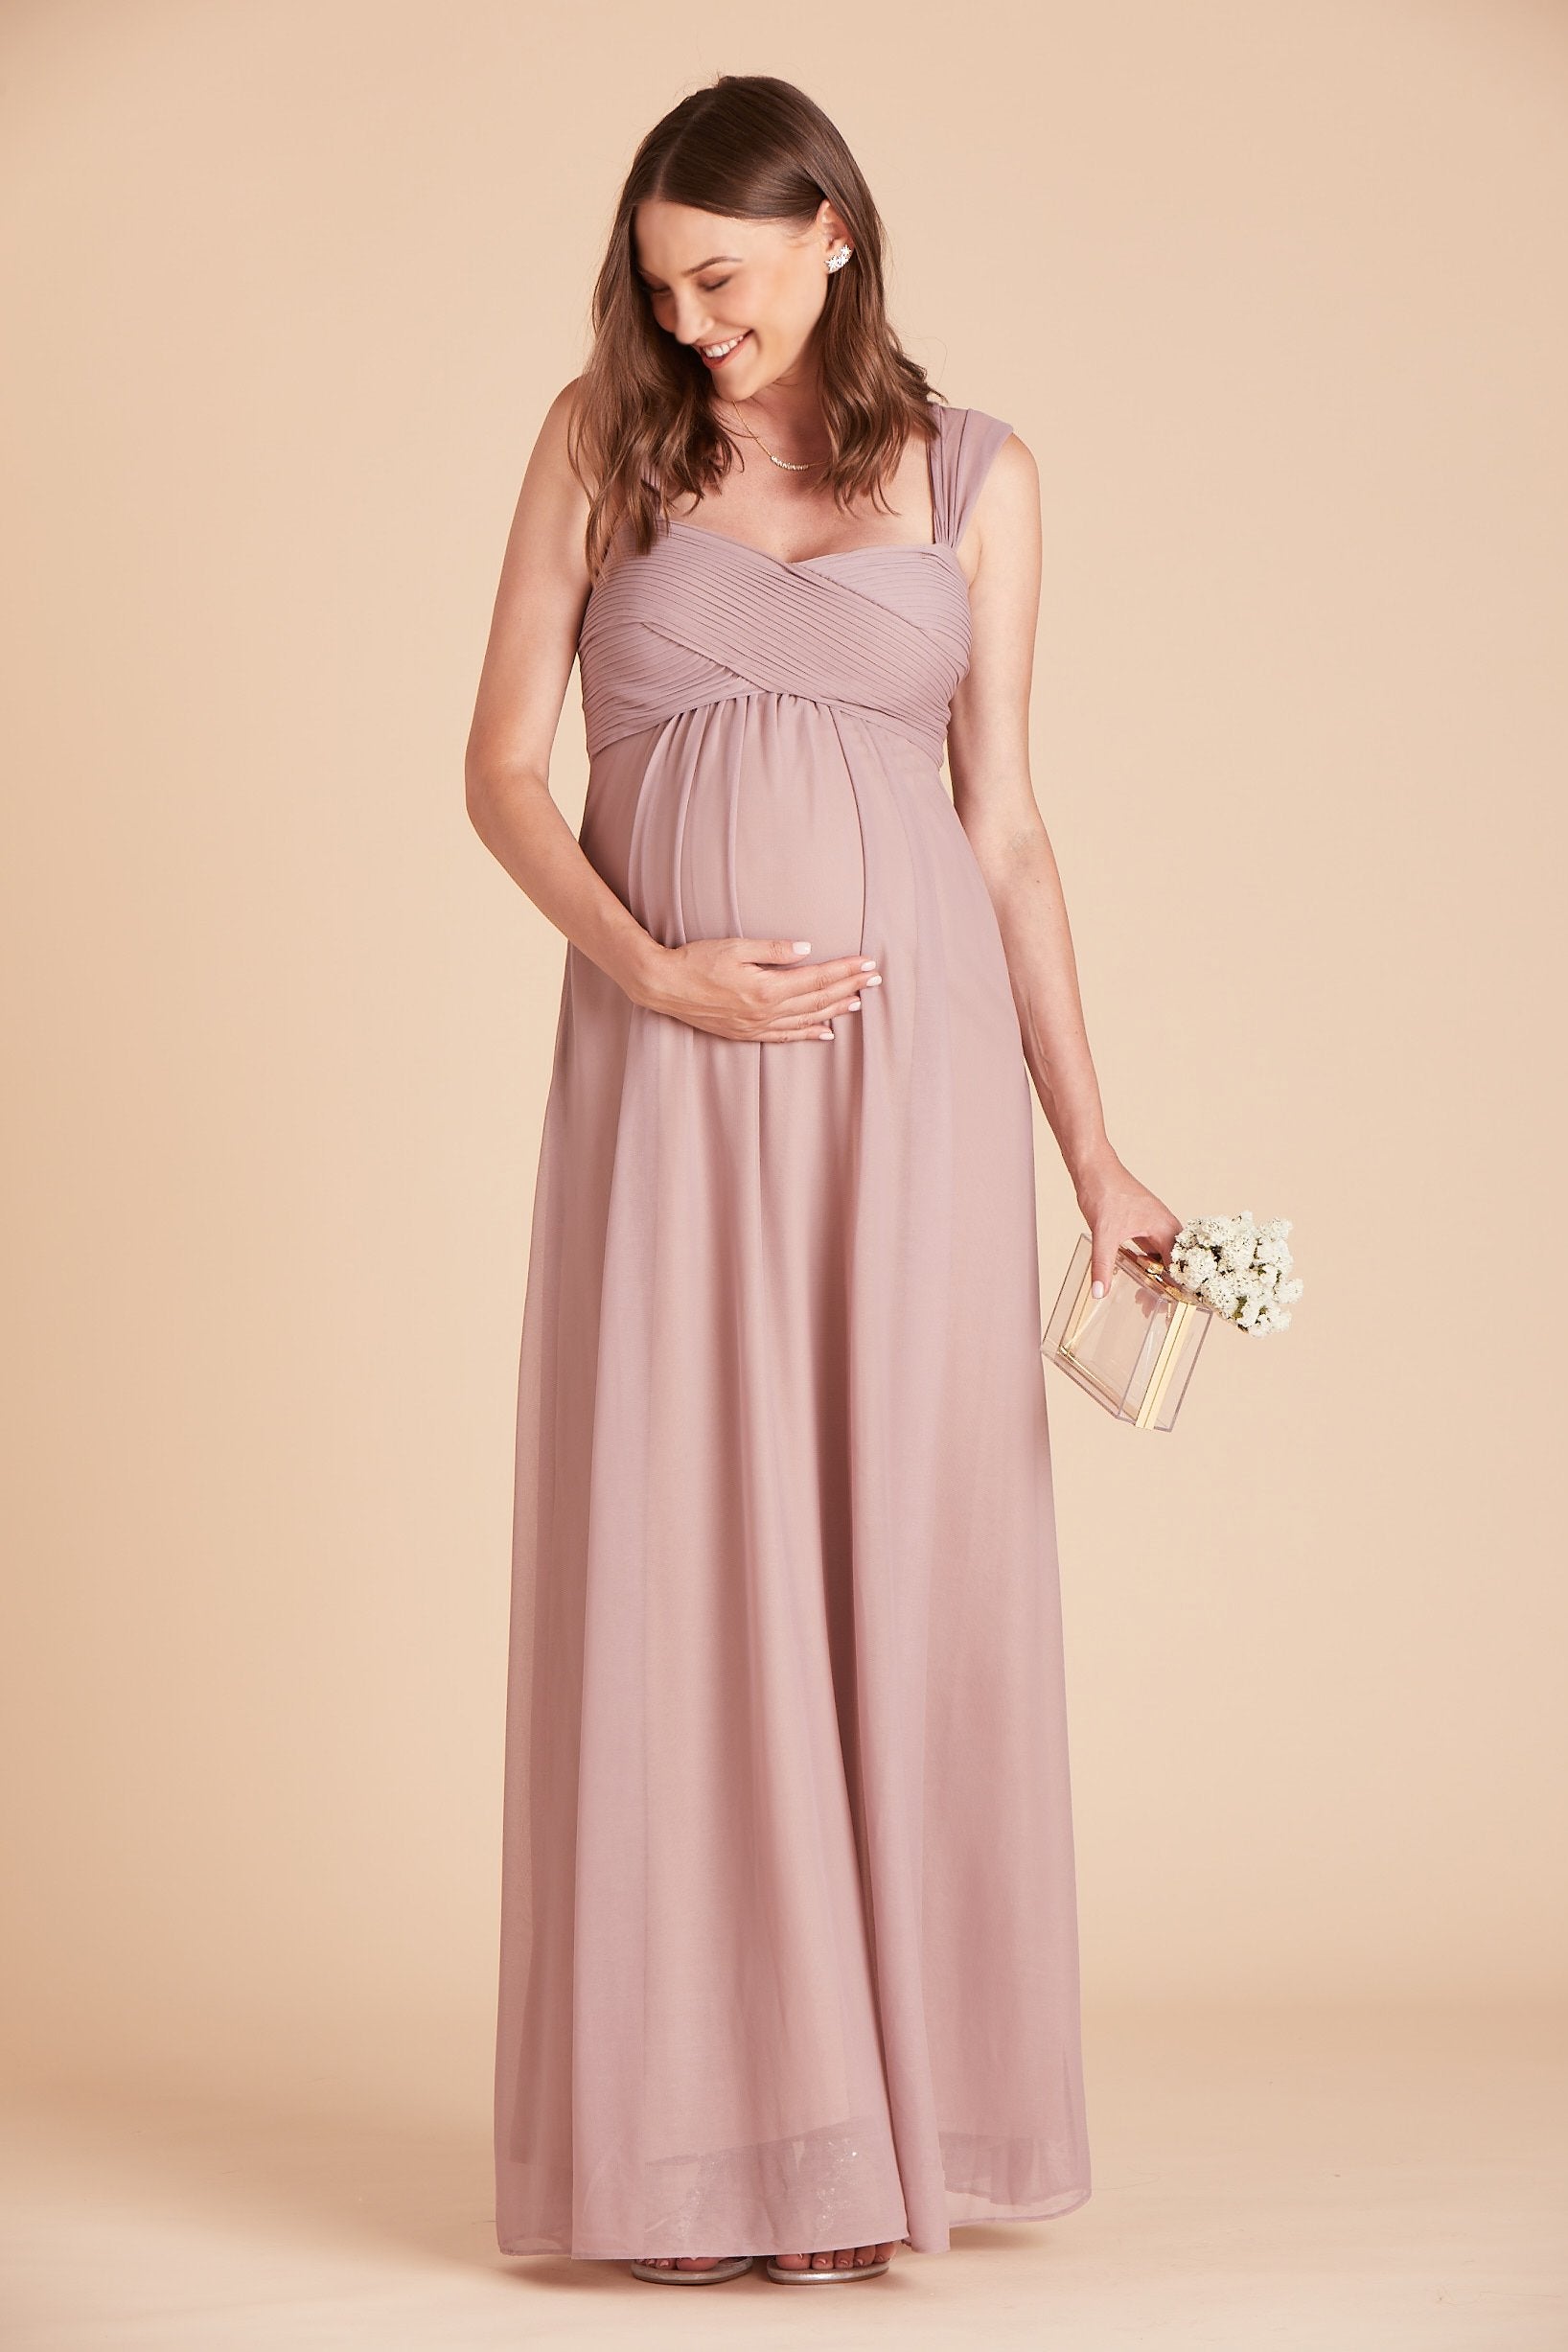 Maria convertible bridesmaids dress in mauve chiffon by Birdy Grey, front view